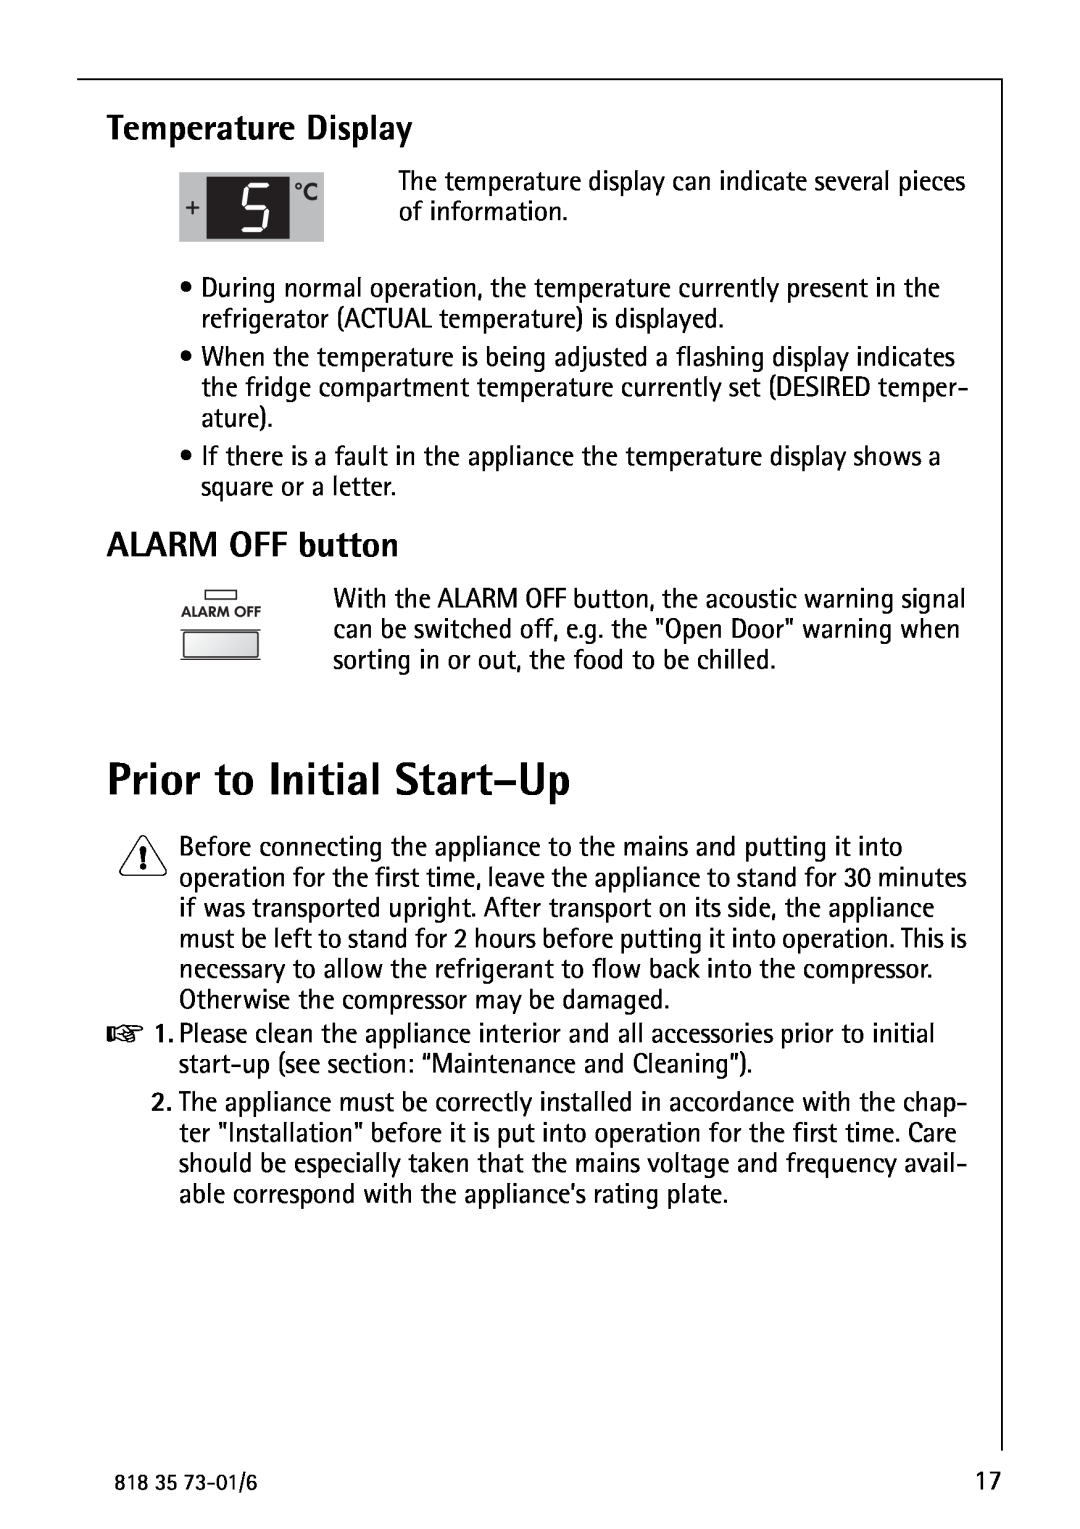 Electrolux SANTO 72340 KA operating instructions Prior to Initial Start-Up, Temperature Display, ALARM OFF button 